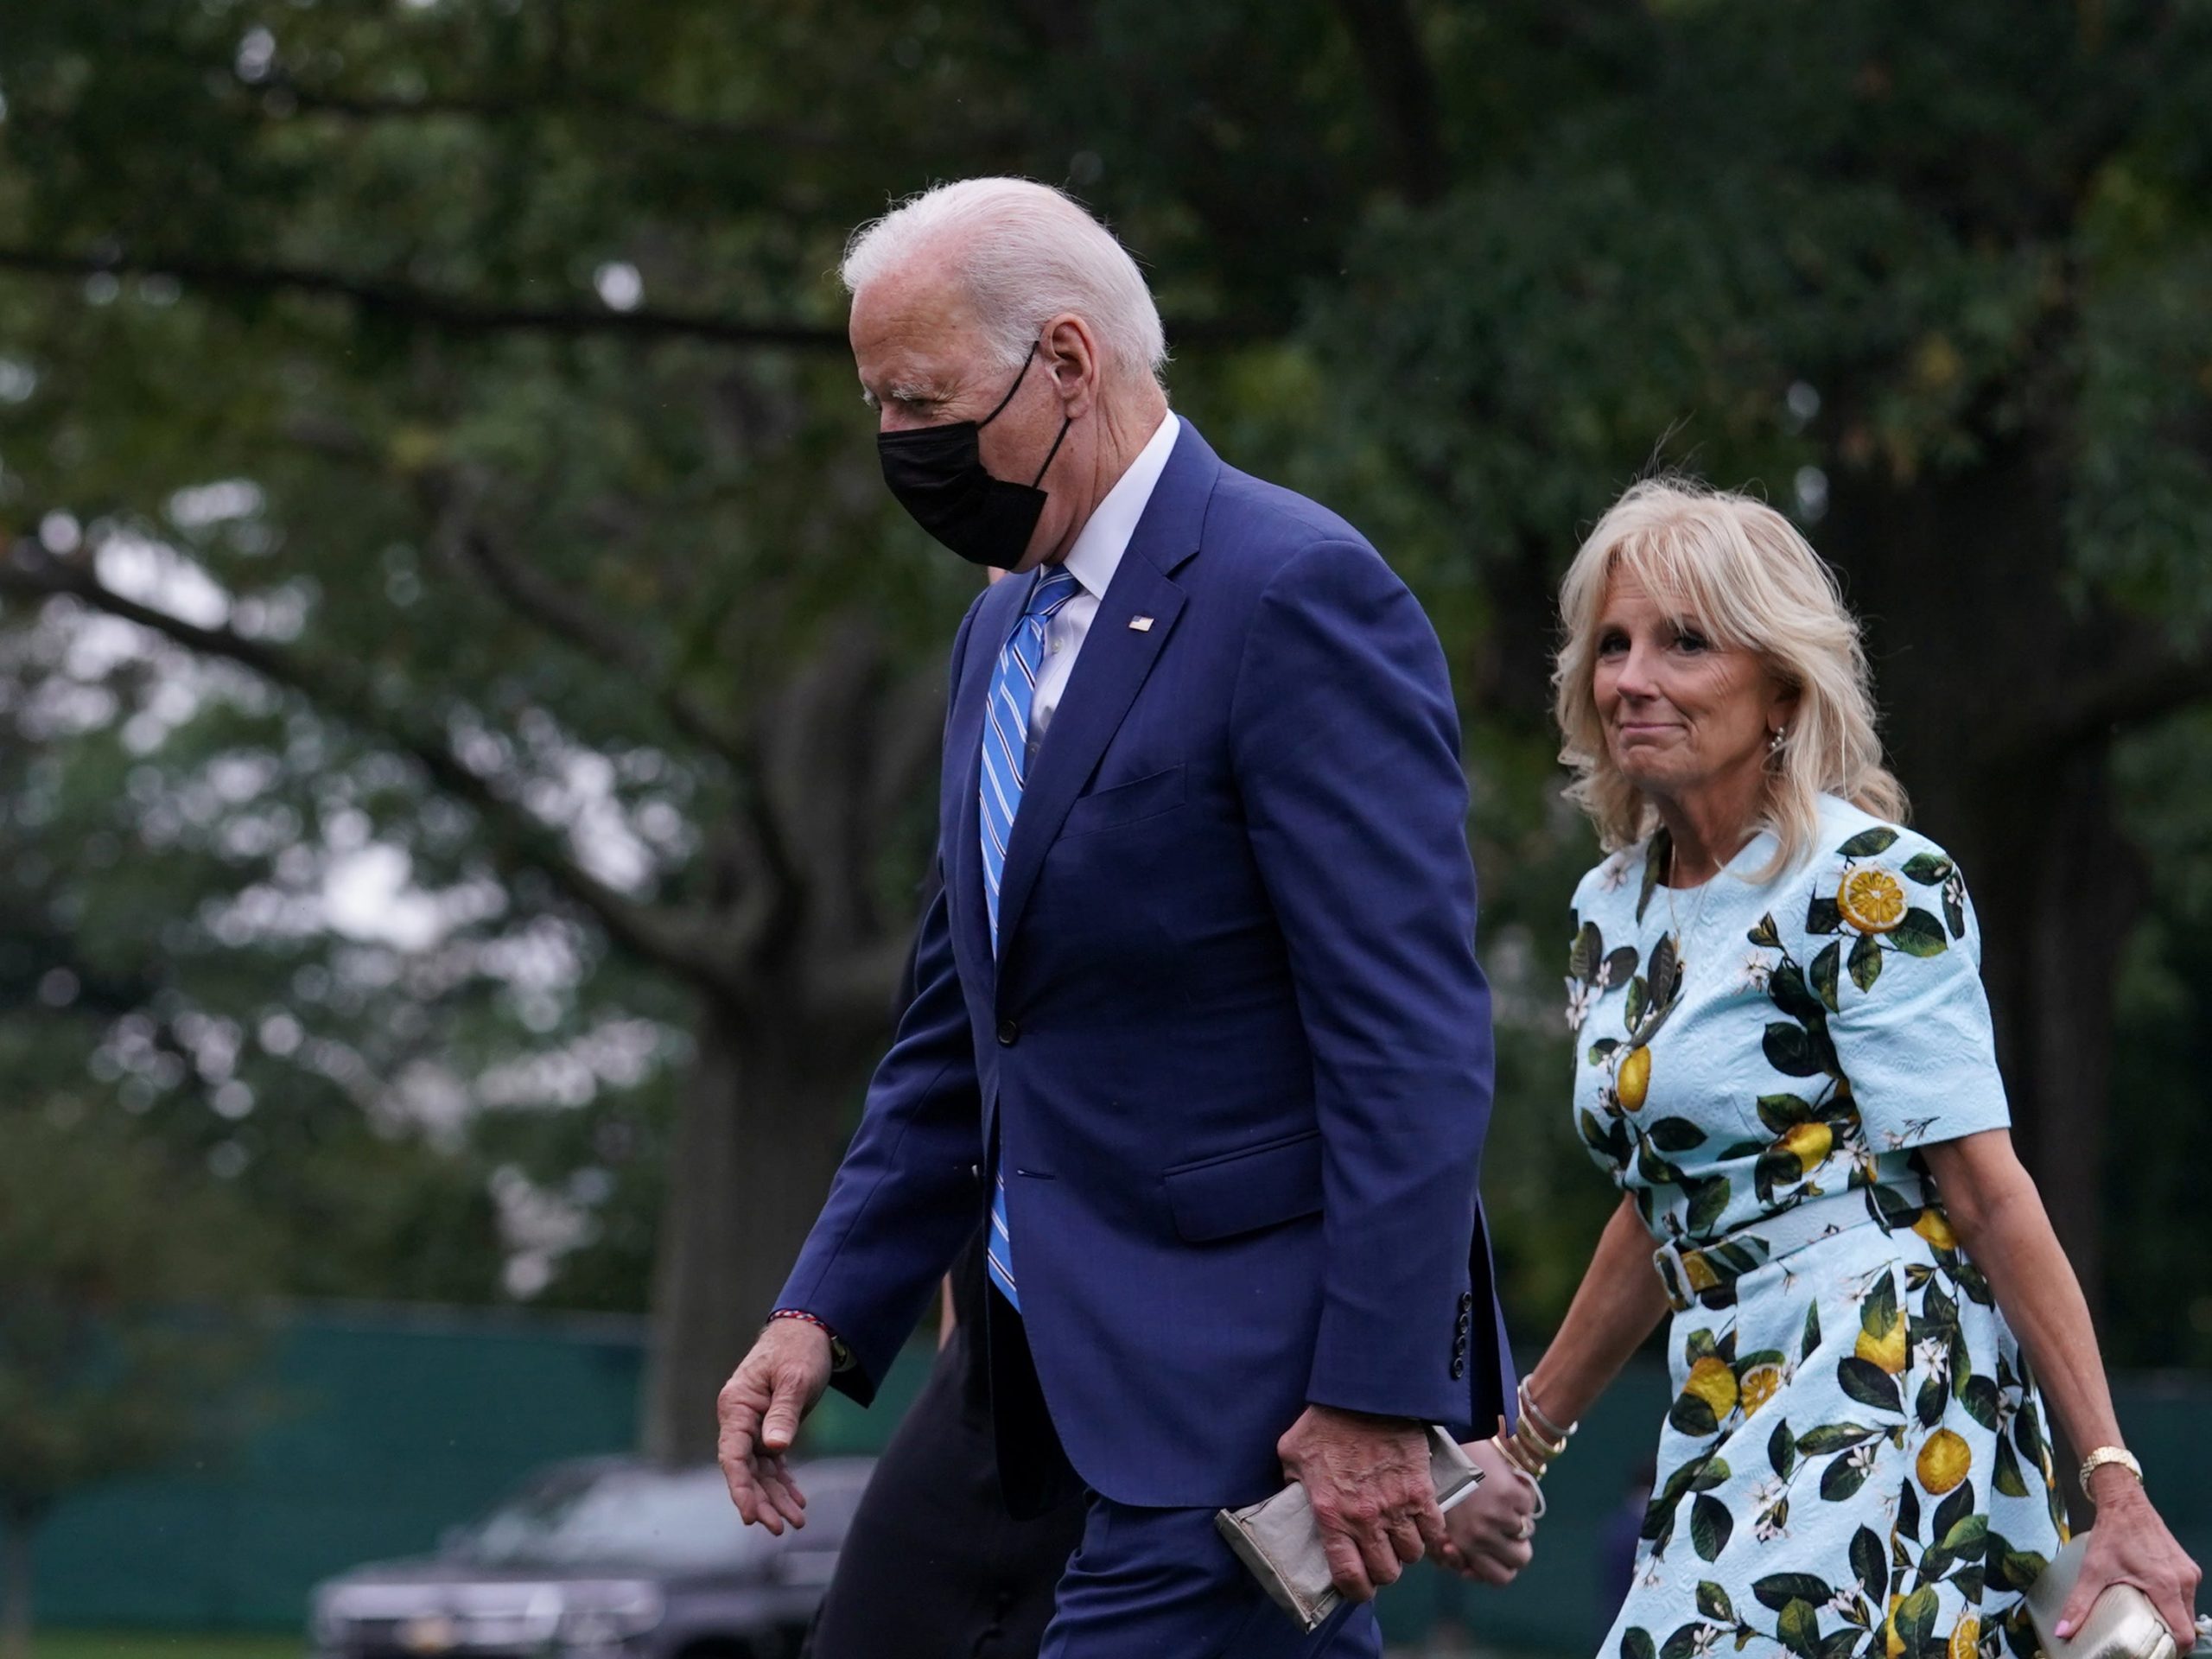 President Joe Biden and his wife Dr. Jill Biden arrive back in the White House on Monday.